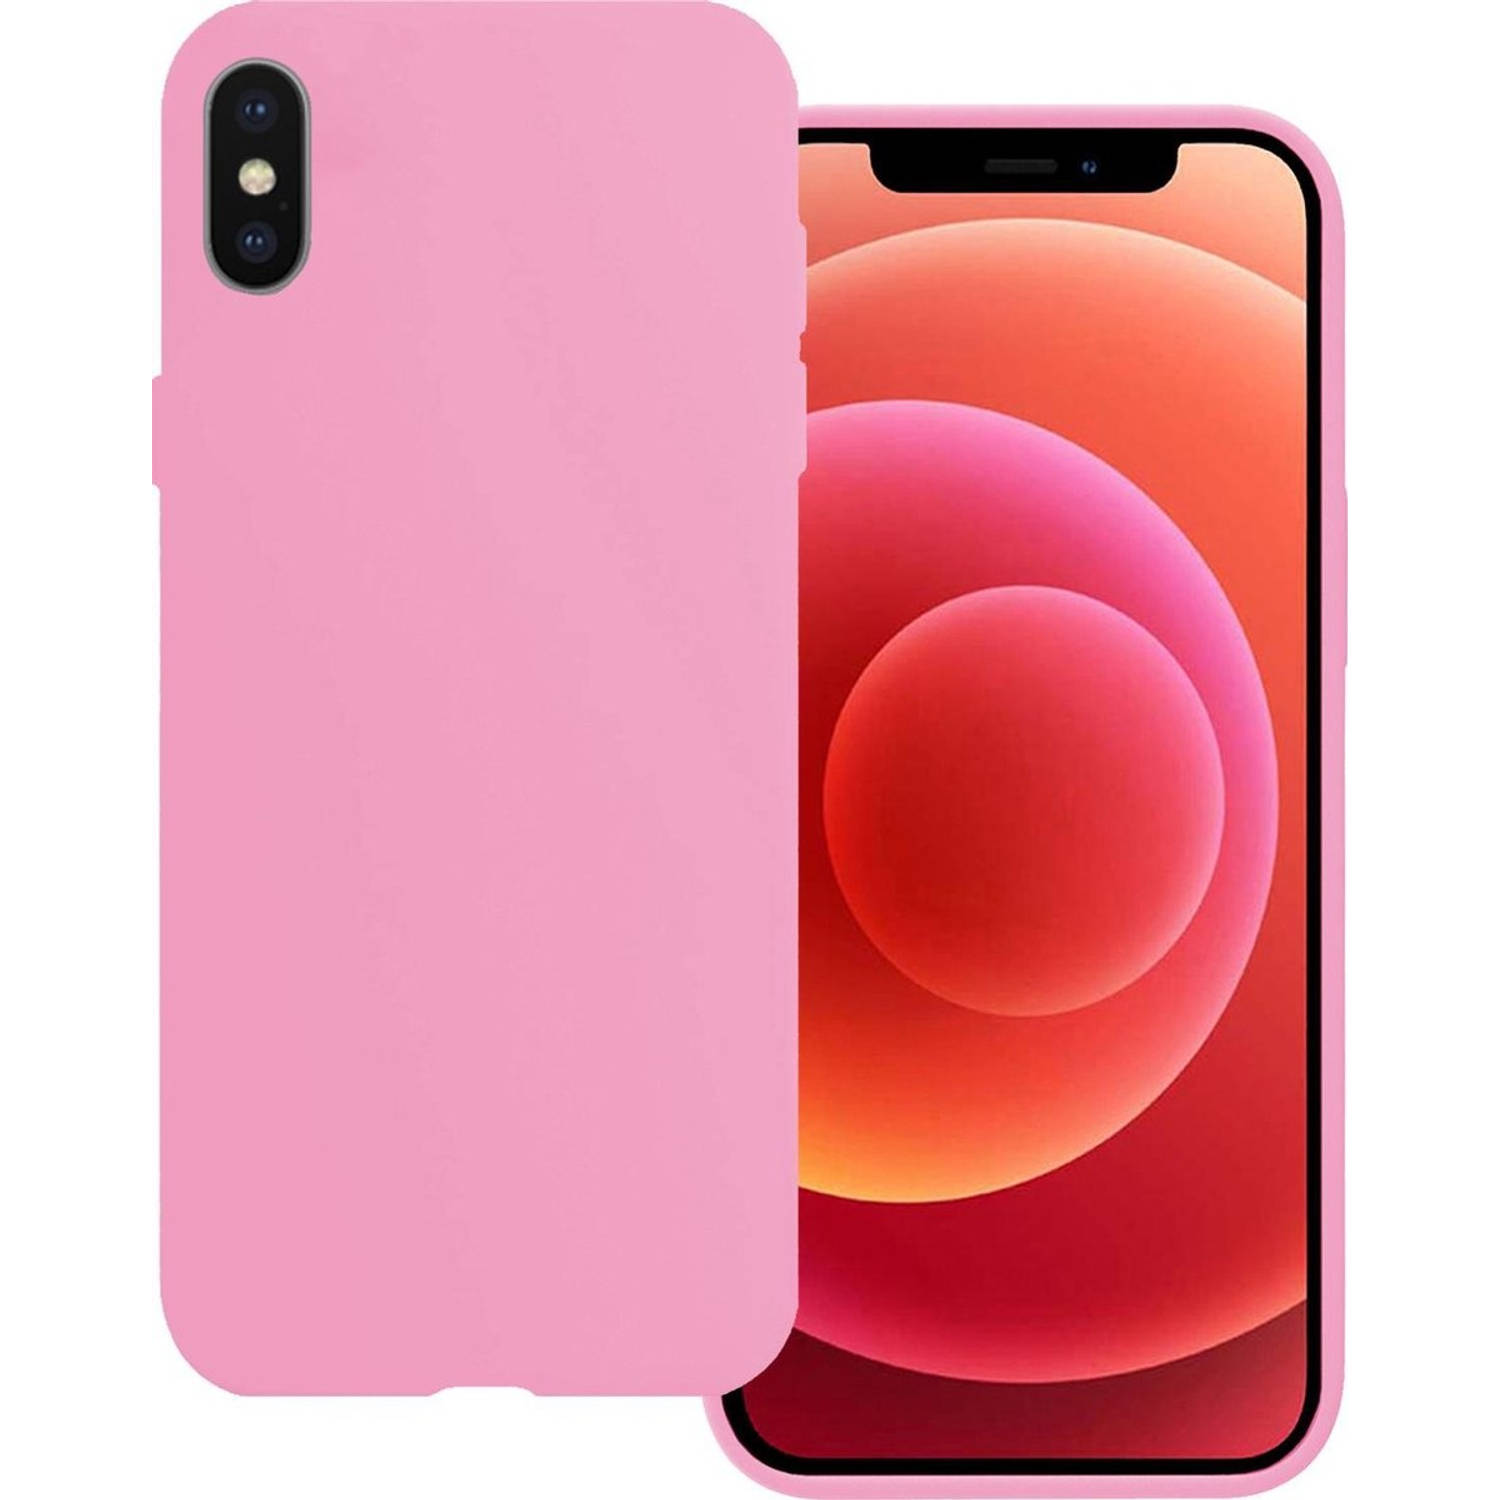 Basey iPhone Xs Max Hoesje Siliconen Hoes Case Cover -Lichtroze